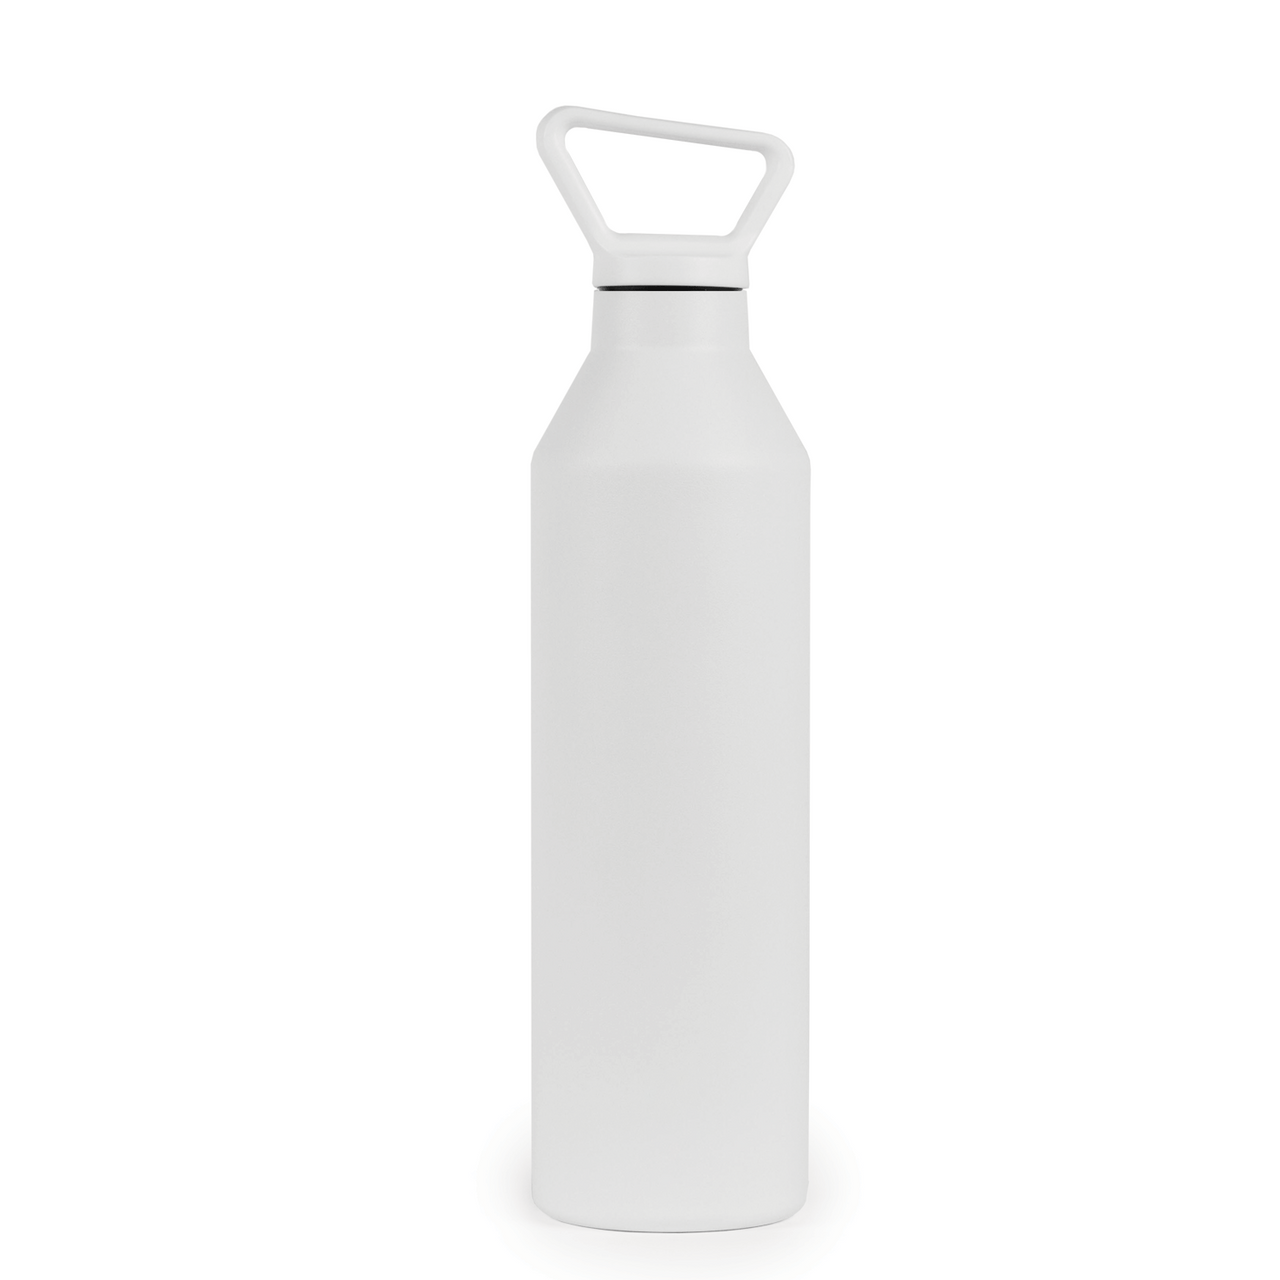 23oz White MiiR Narrow Mouth Bottle, 12/case - DISTILLERY PRODUCTS